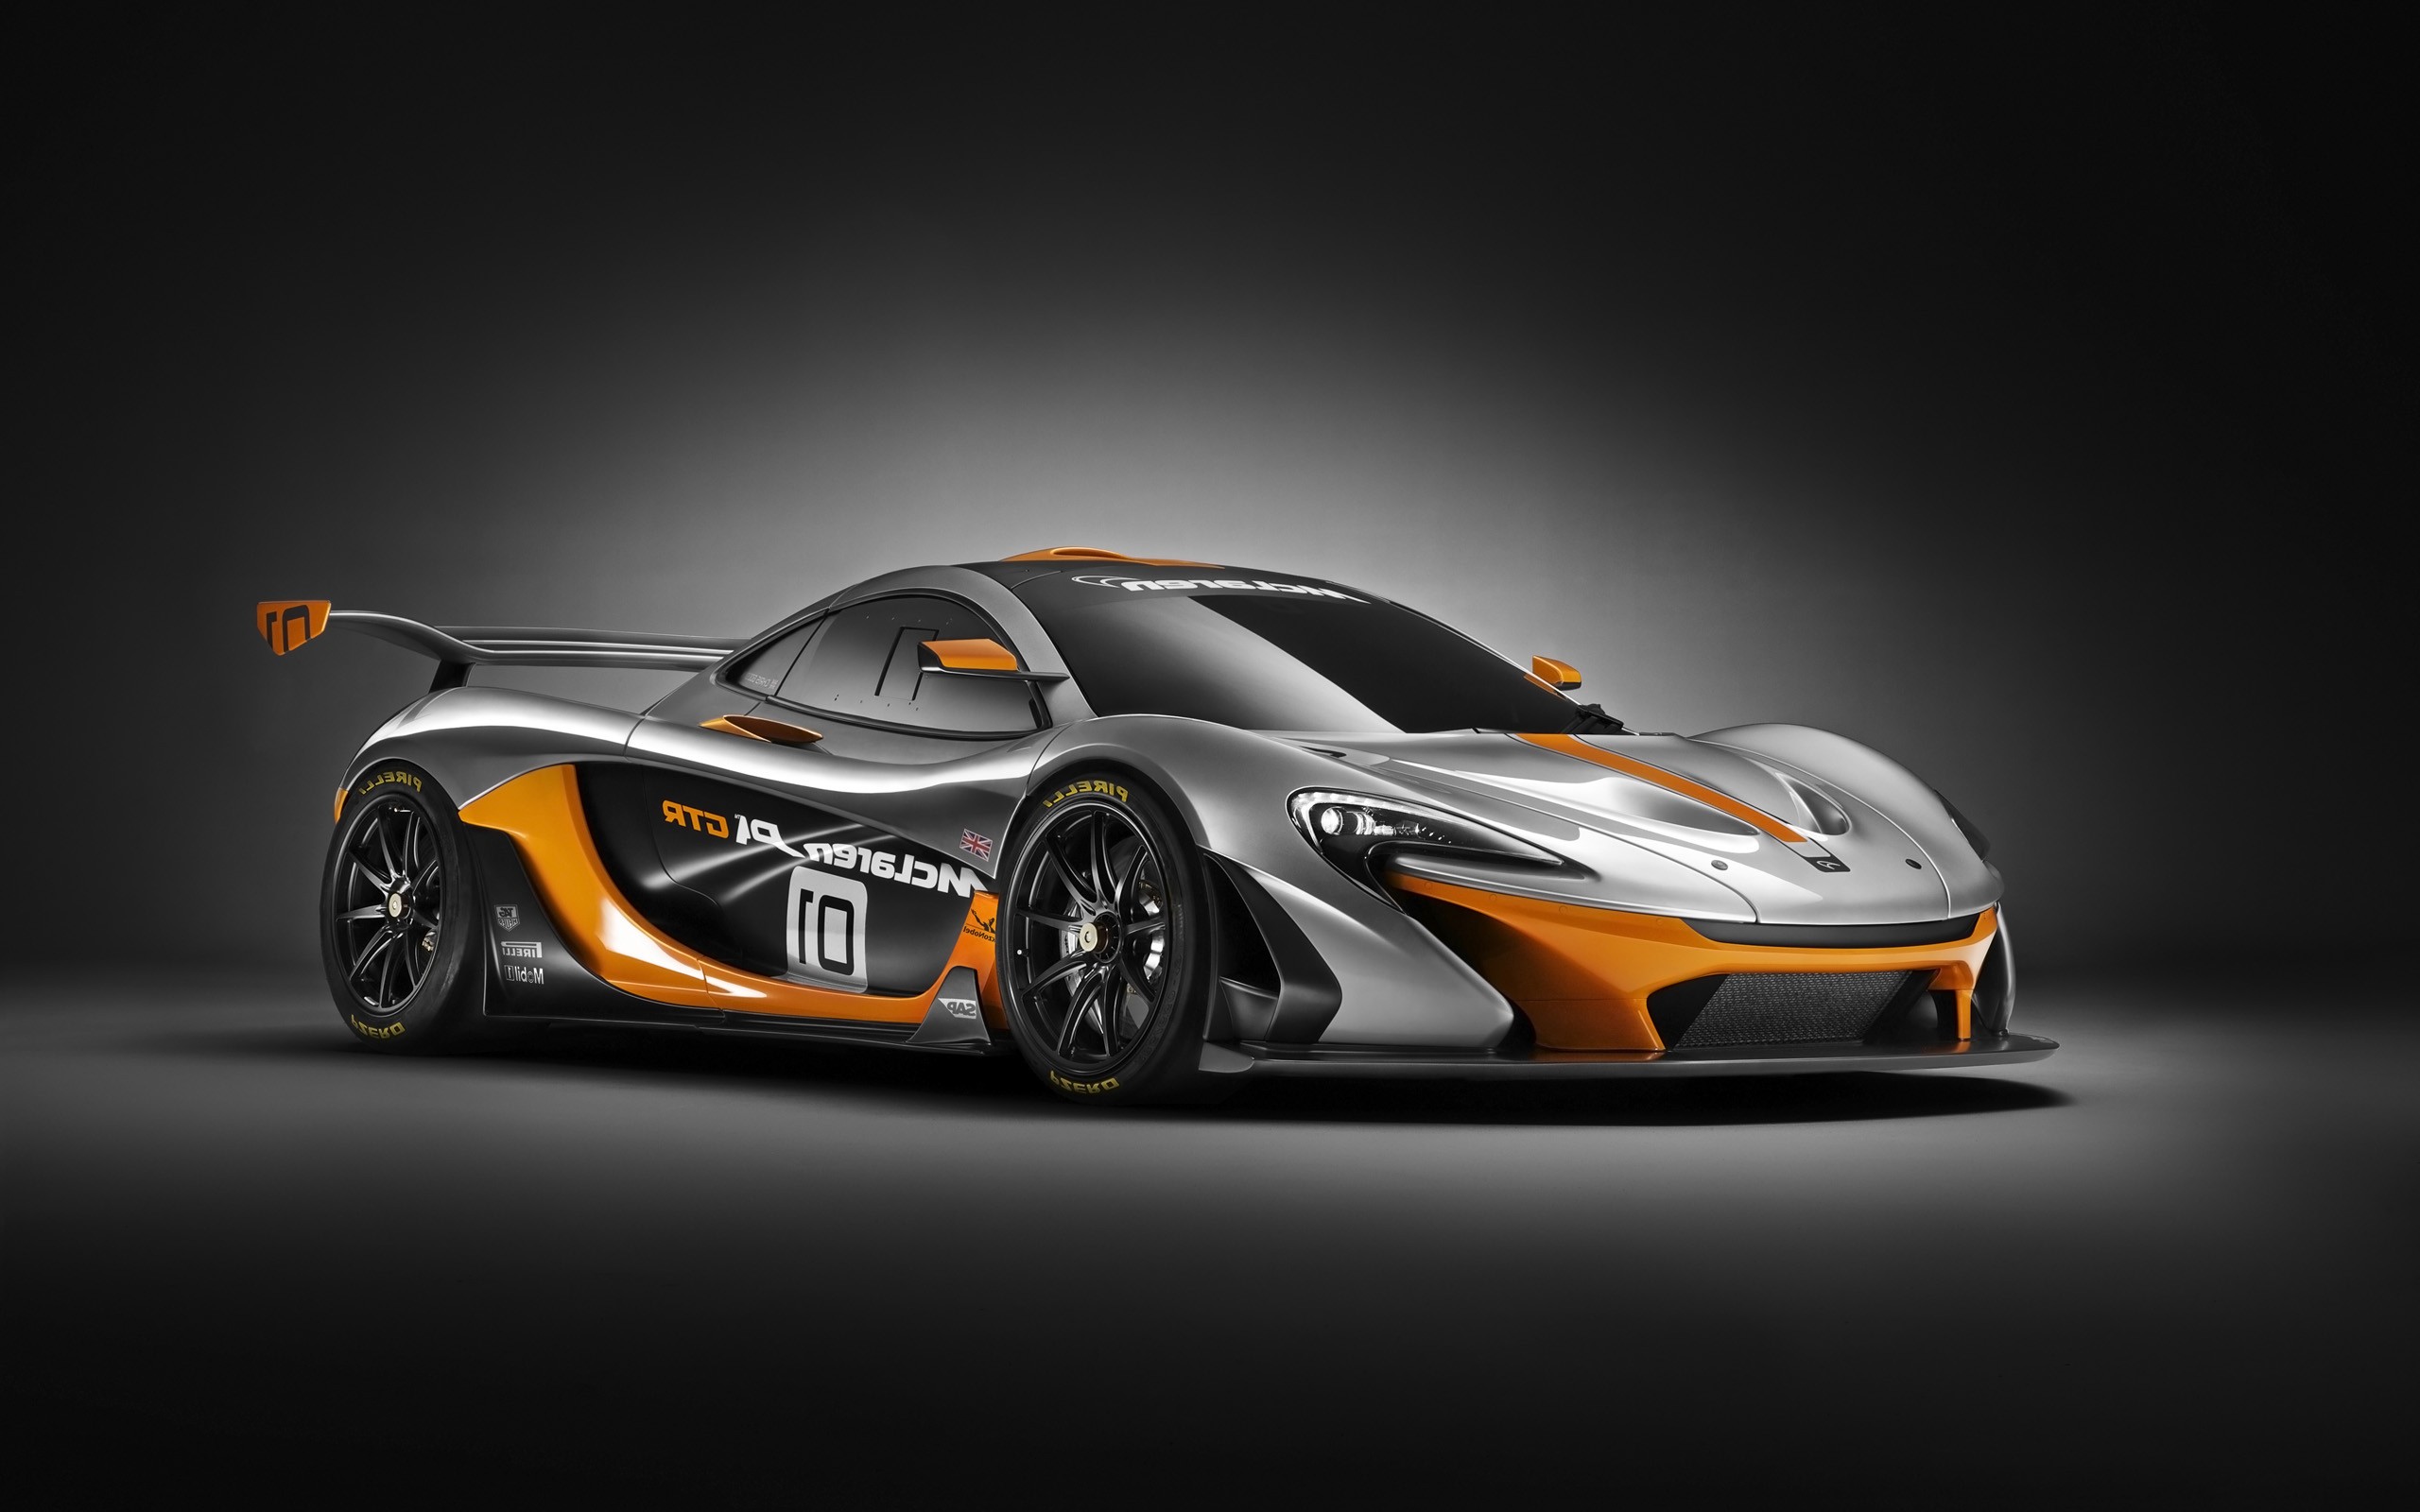 2560x1440 Mclaren P1 Gtr Super Car Concept 1440p Resolution Hd 4k Wallpapers Images Backgrounds Photos And Pictures